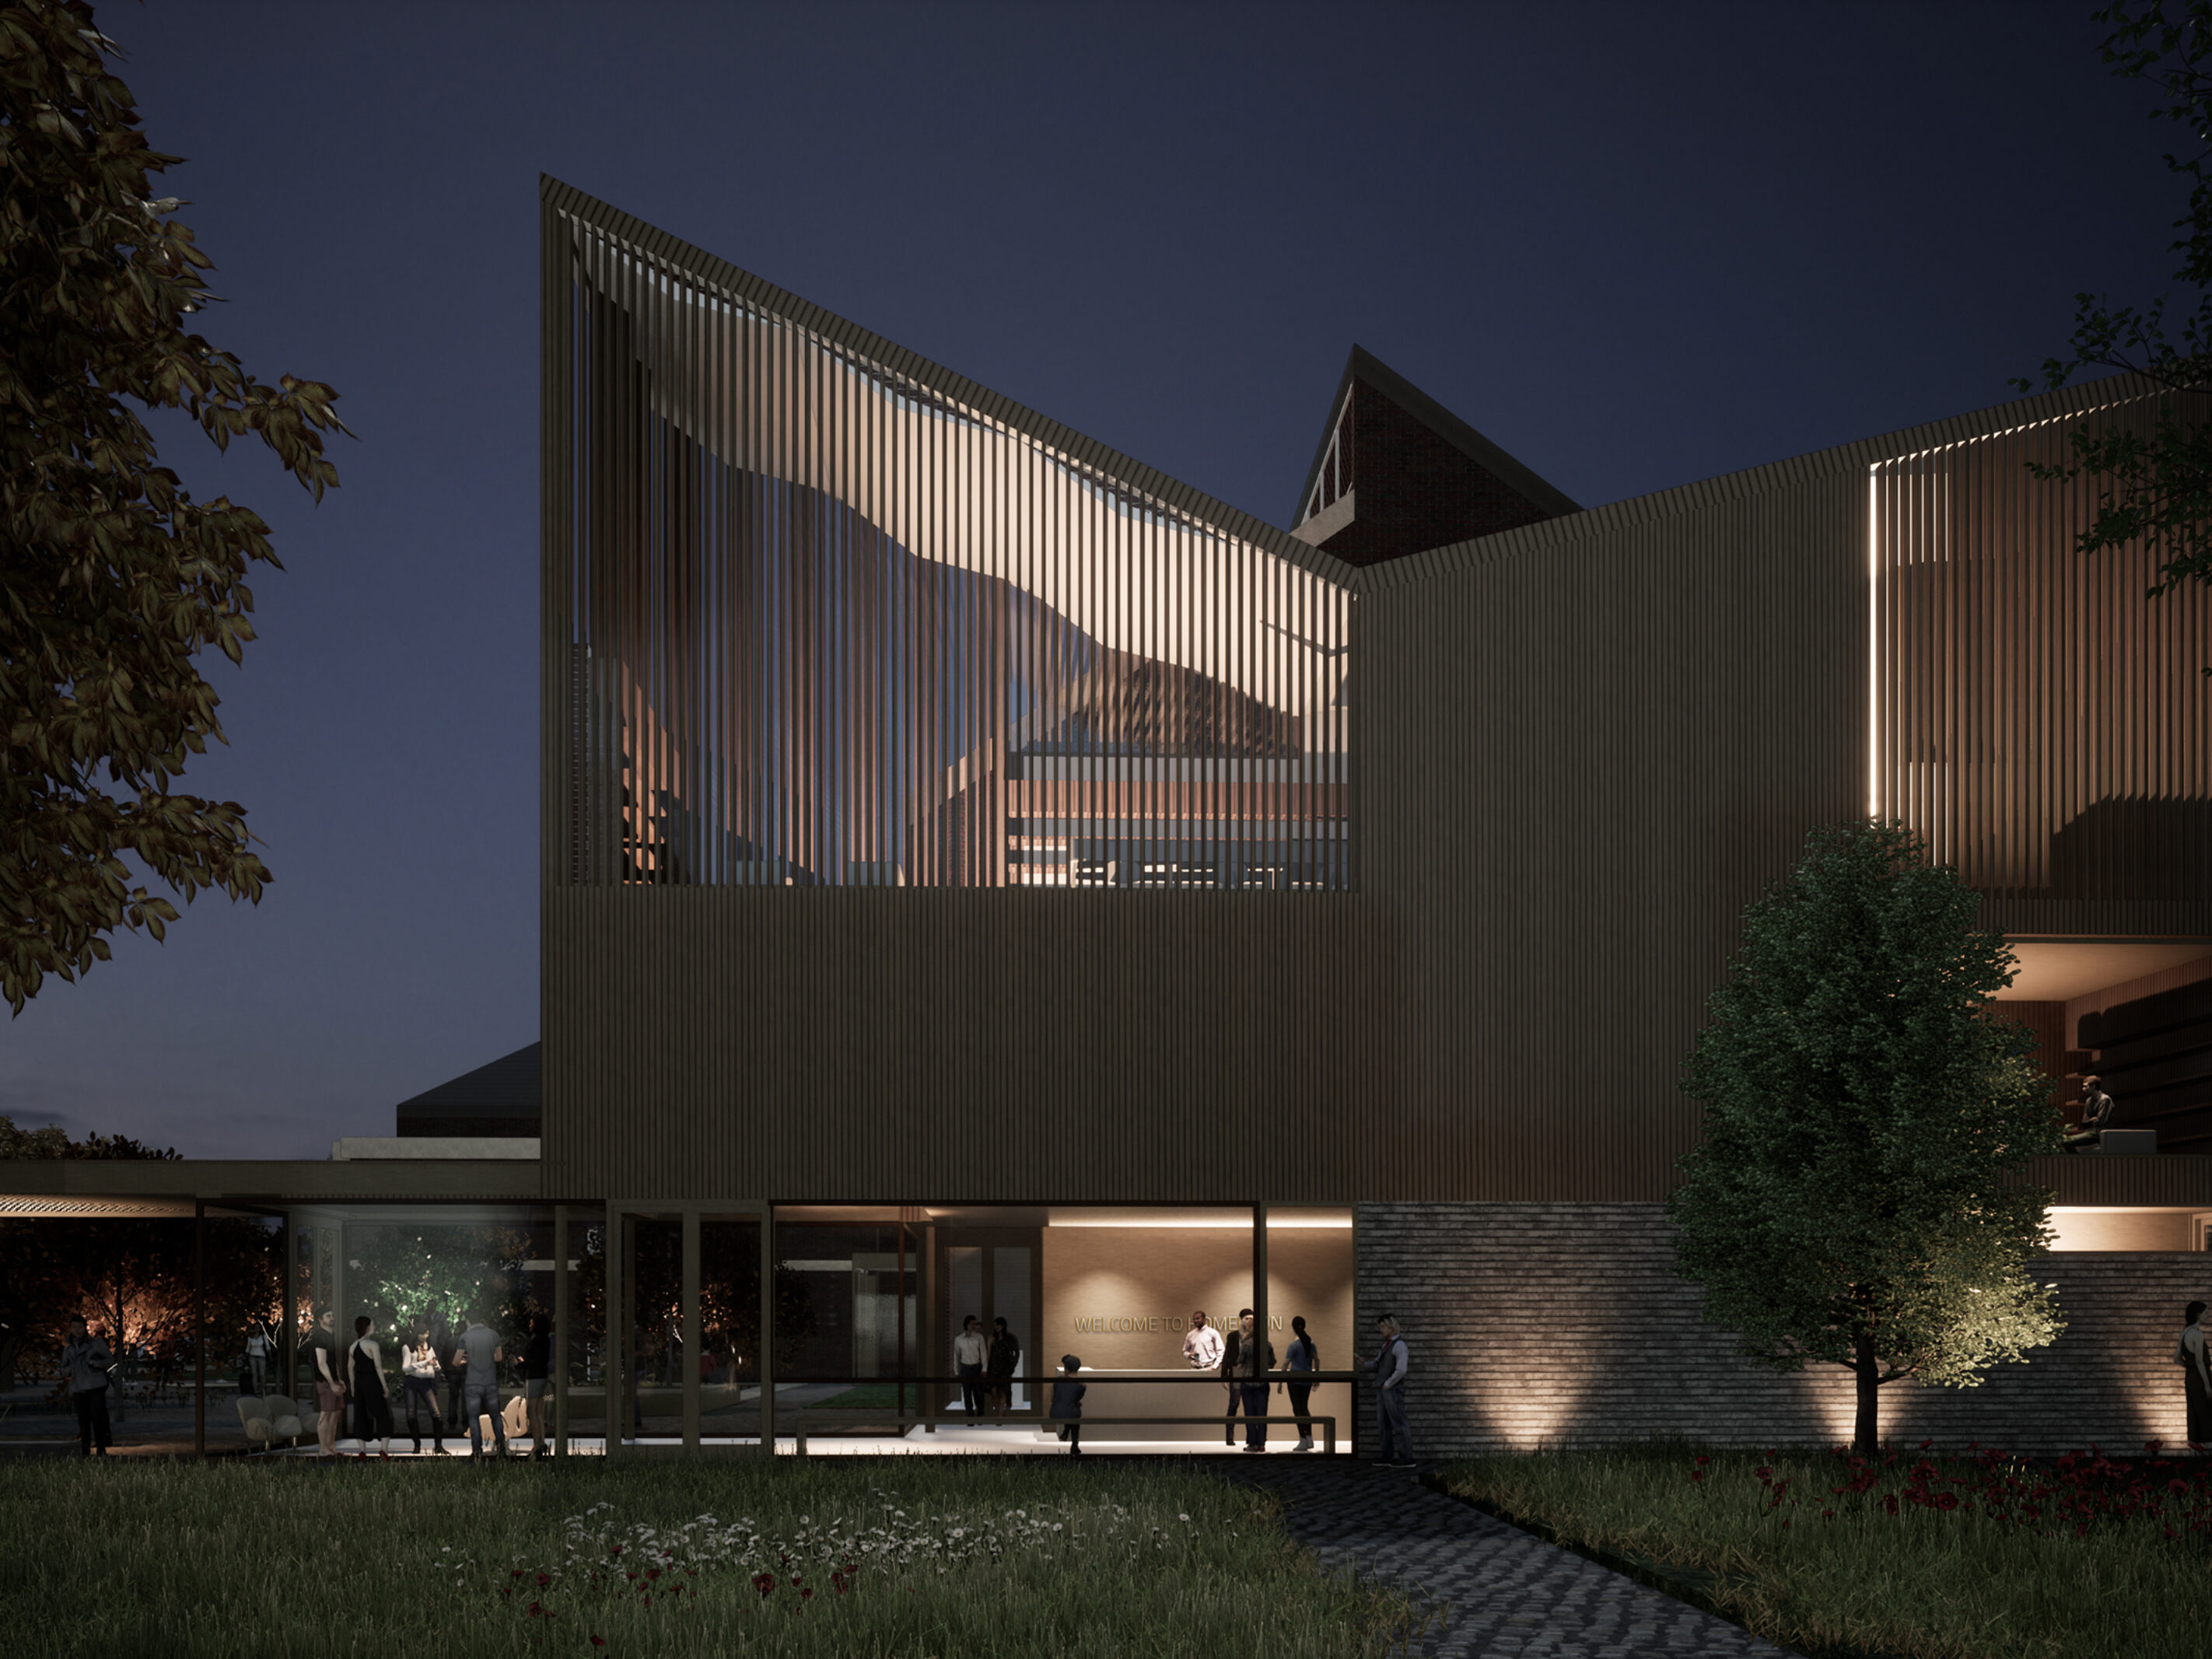 External night time visualisation showing people stood around uplit building with brick cladding to ground floor and timber above with large winged roof. Internal light shines through vertical timber slats to upper floors | cdc studio cambridge architects